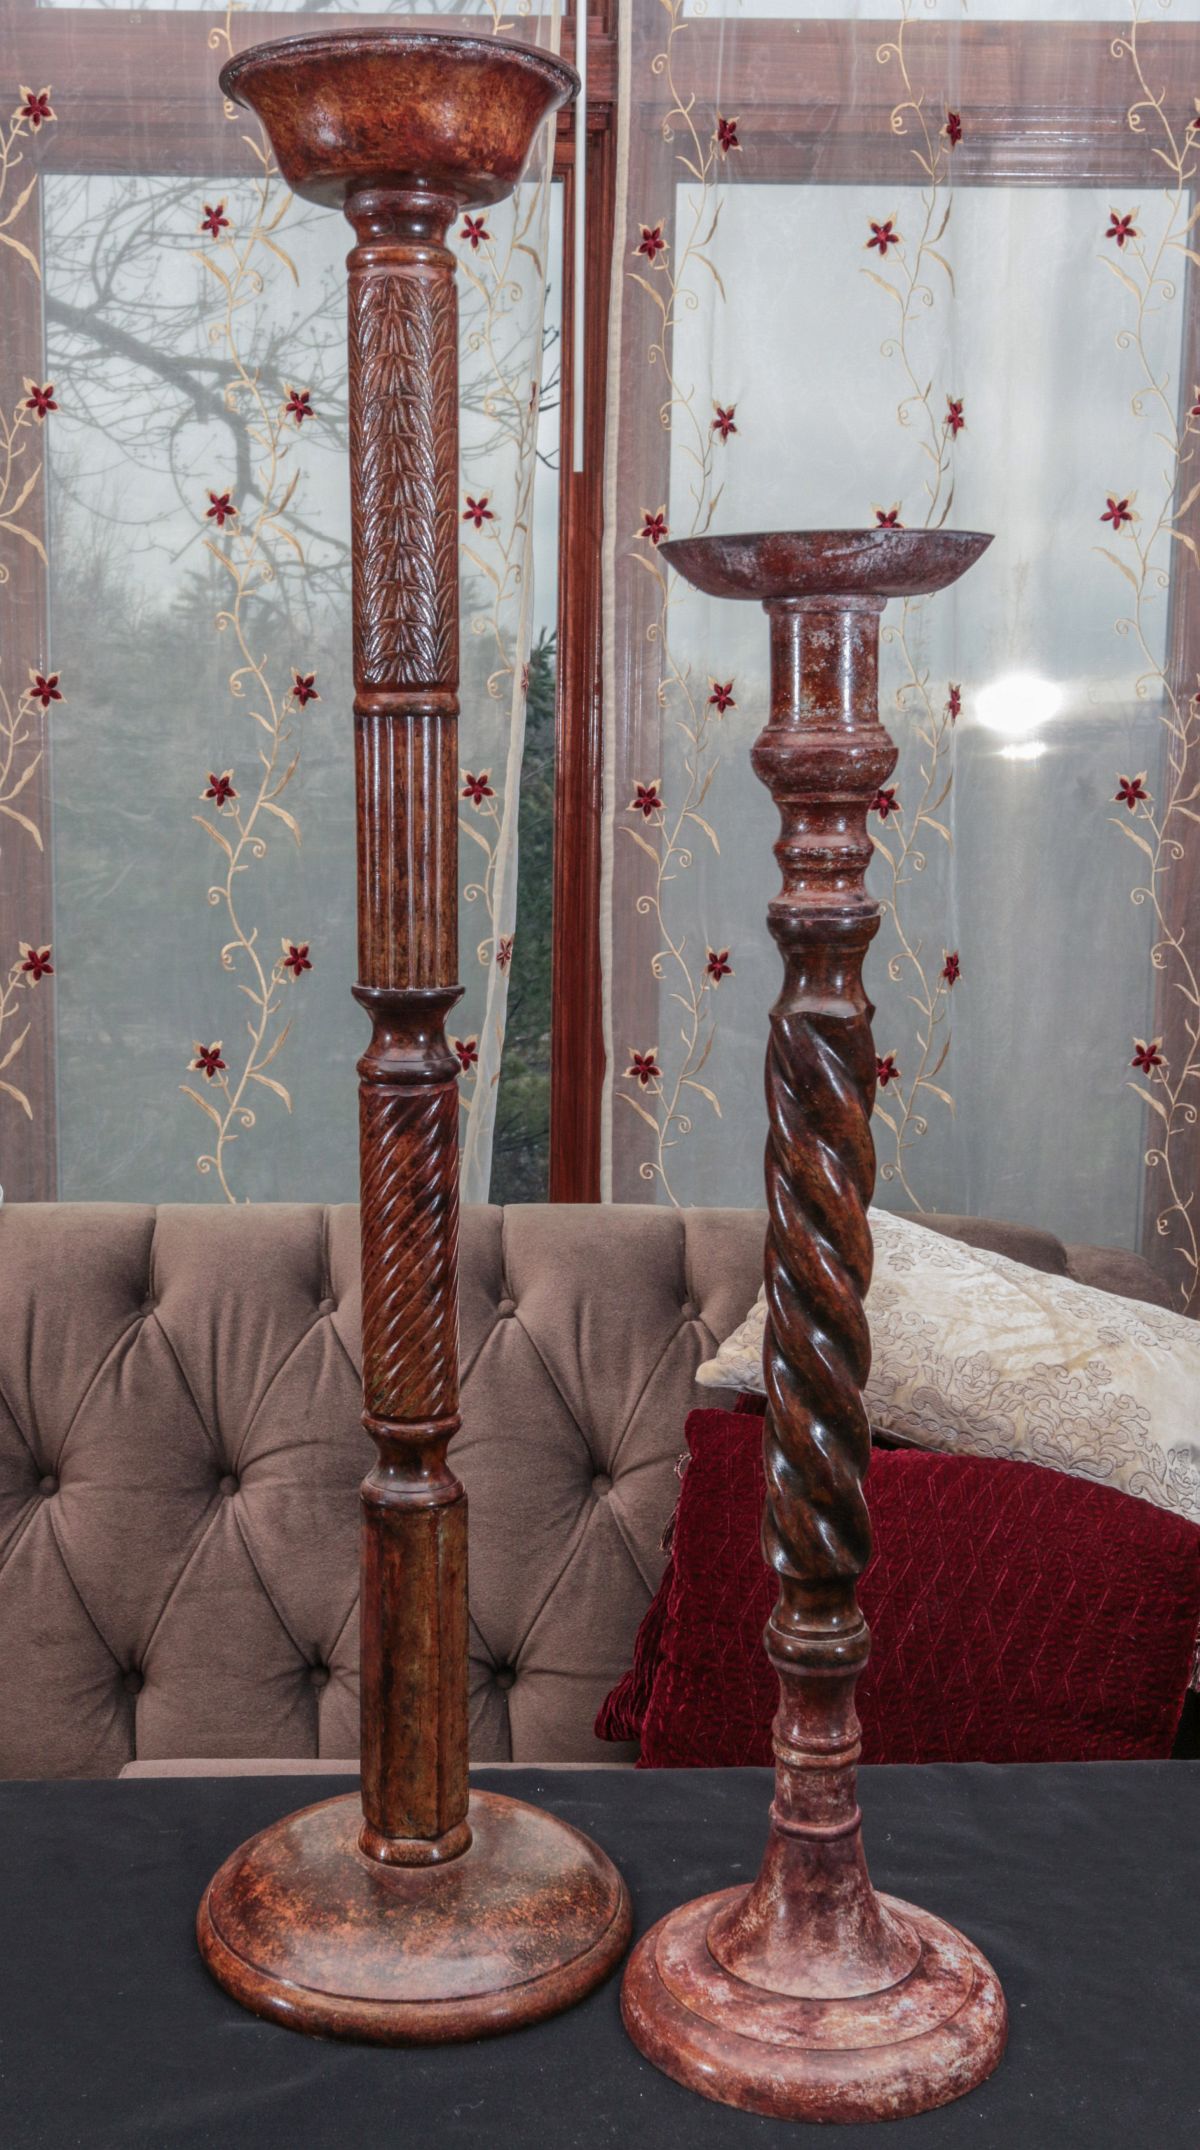 TALL CANDLE PRICKETT STICKS WITH SIMILAR VASES